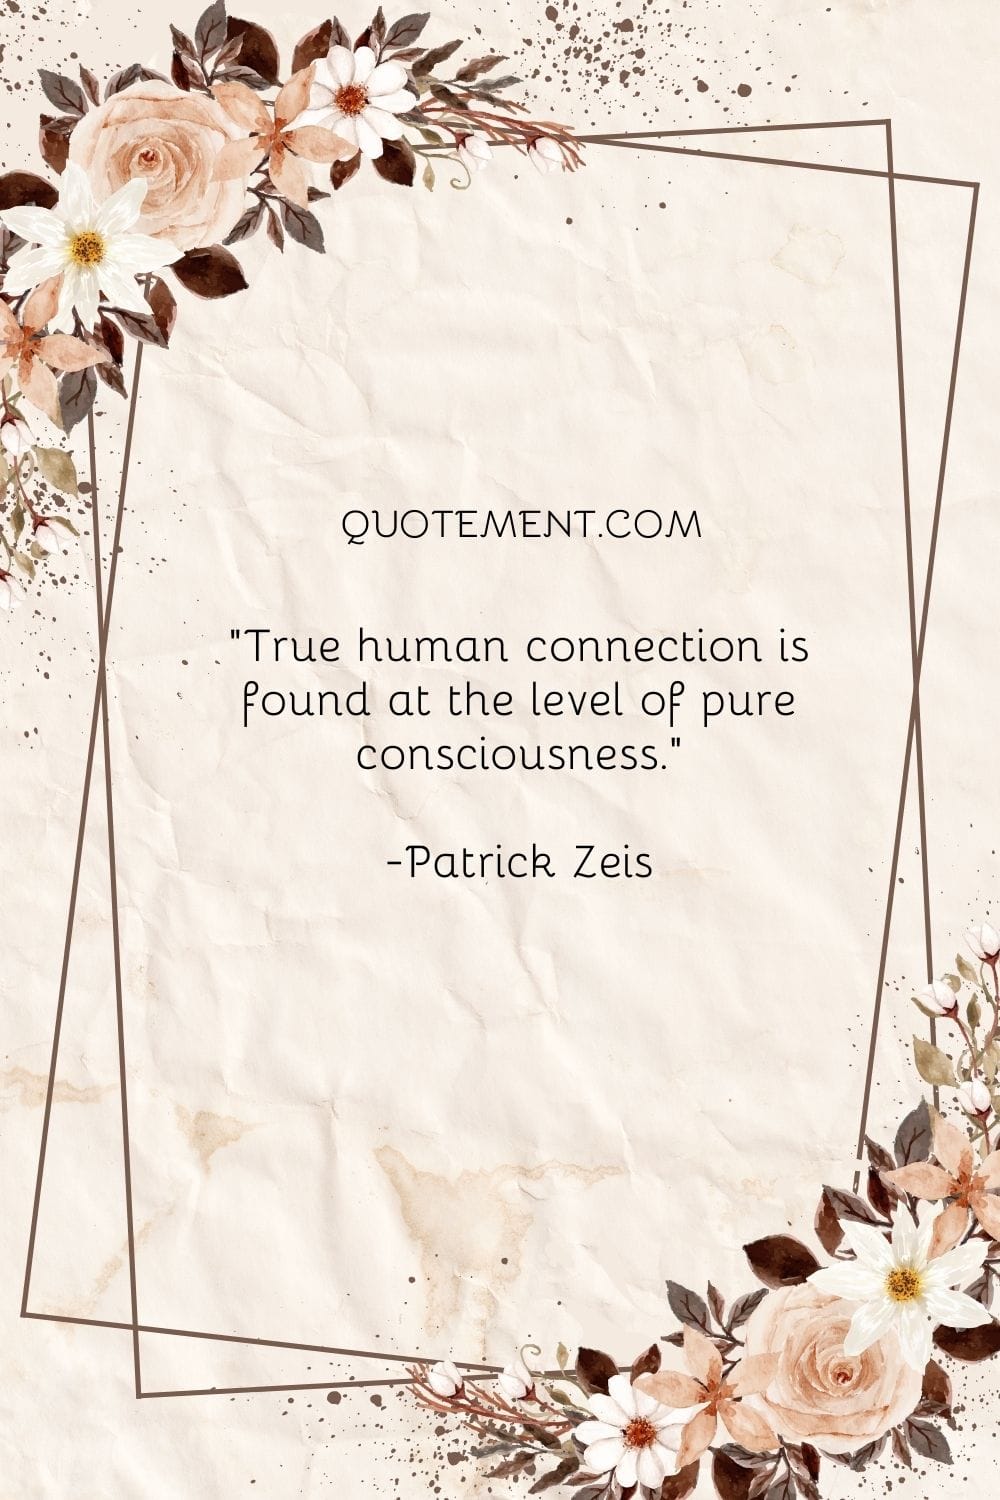 True human connection is found at the level of pure consciousness.